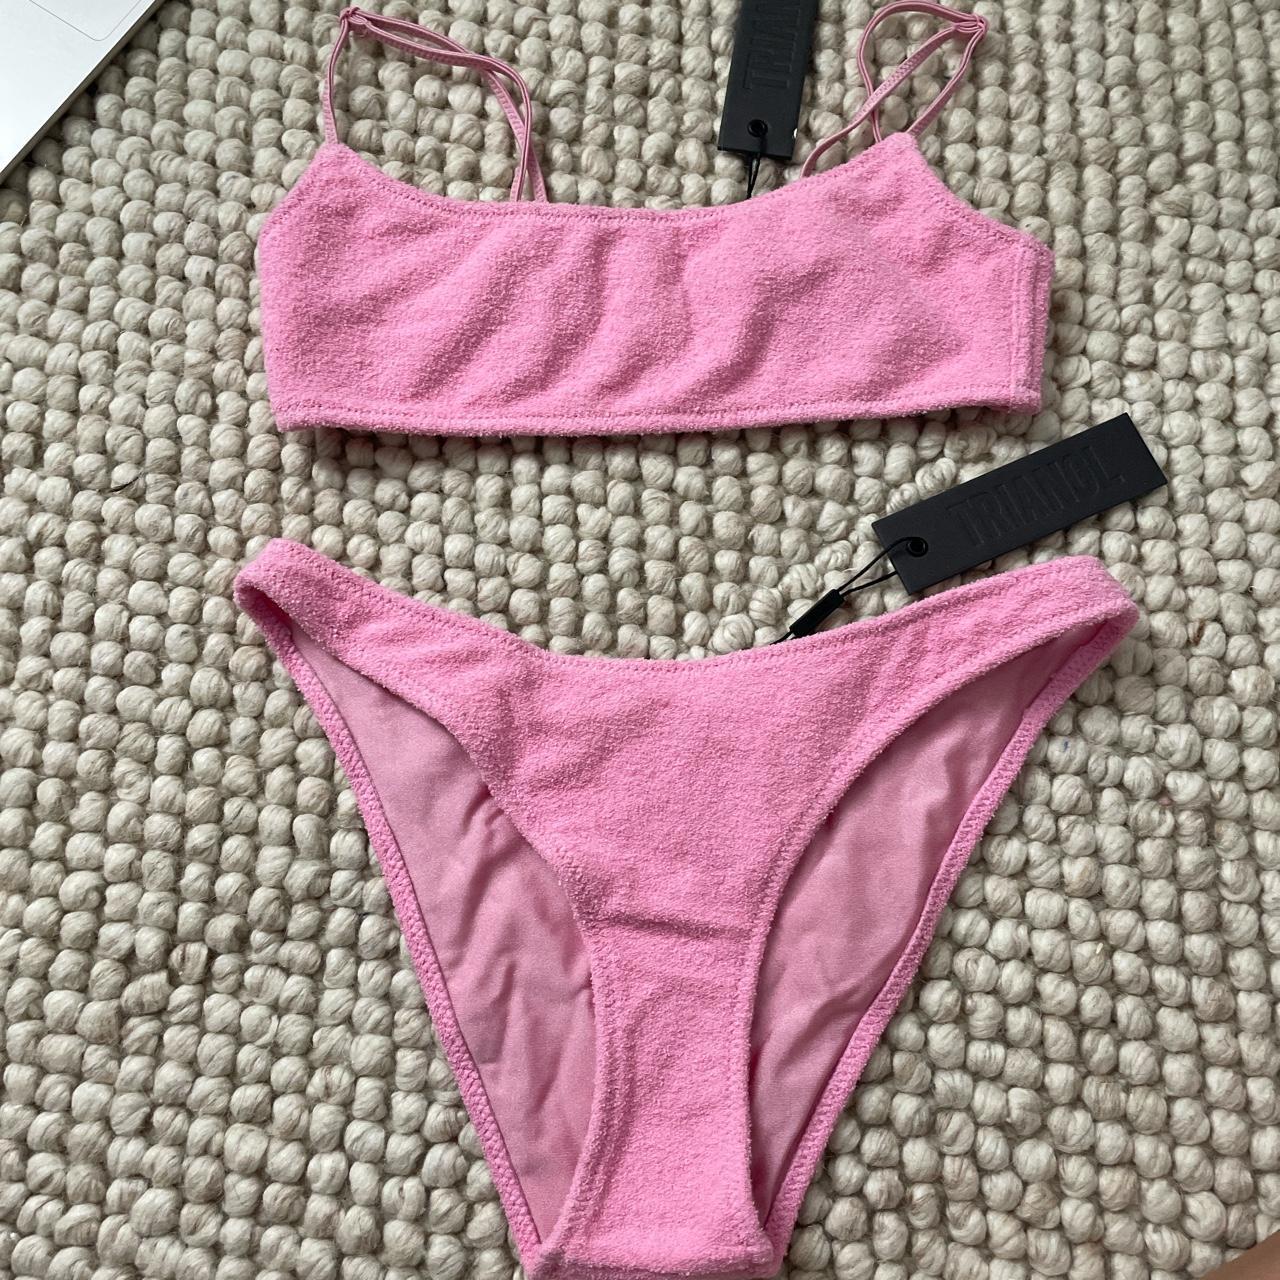 triangle bathing suit brand new EXTREMELY RARE NOT - Depop